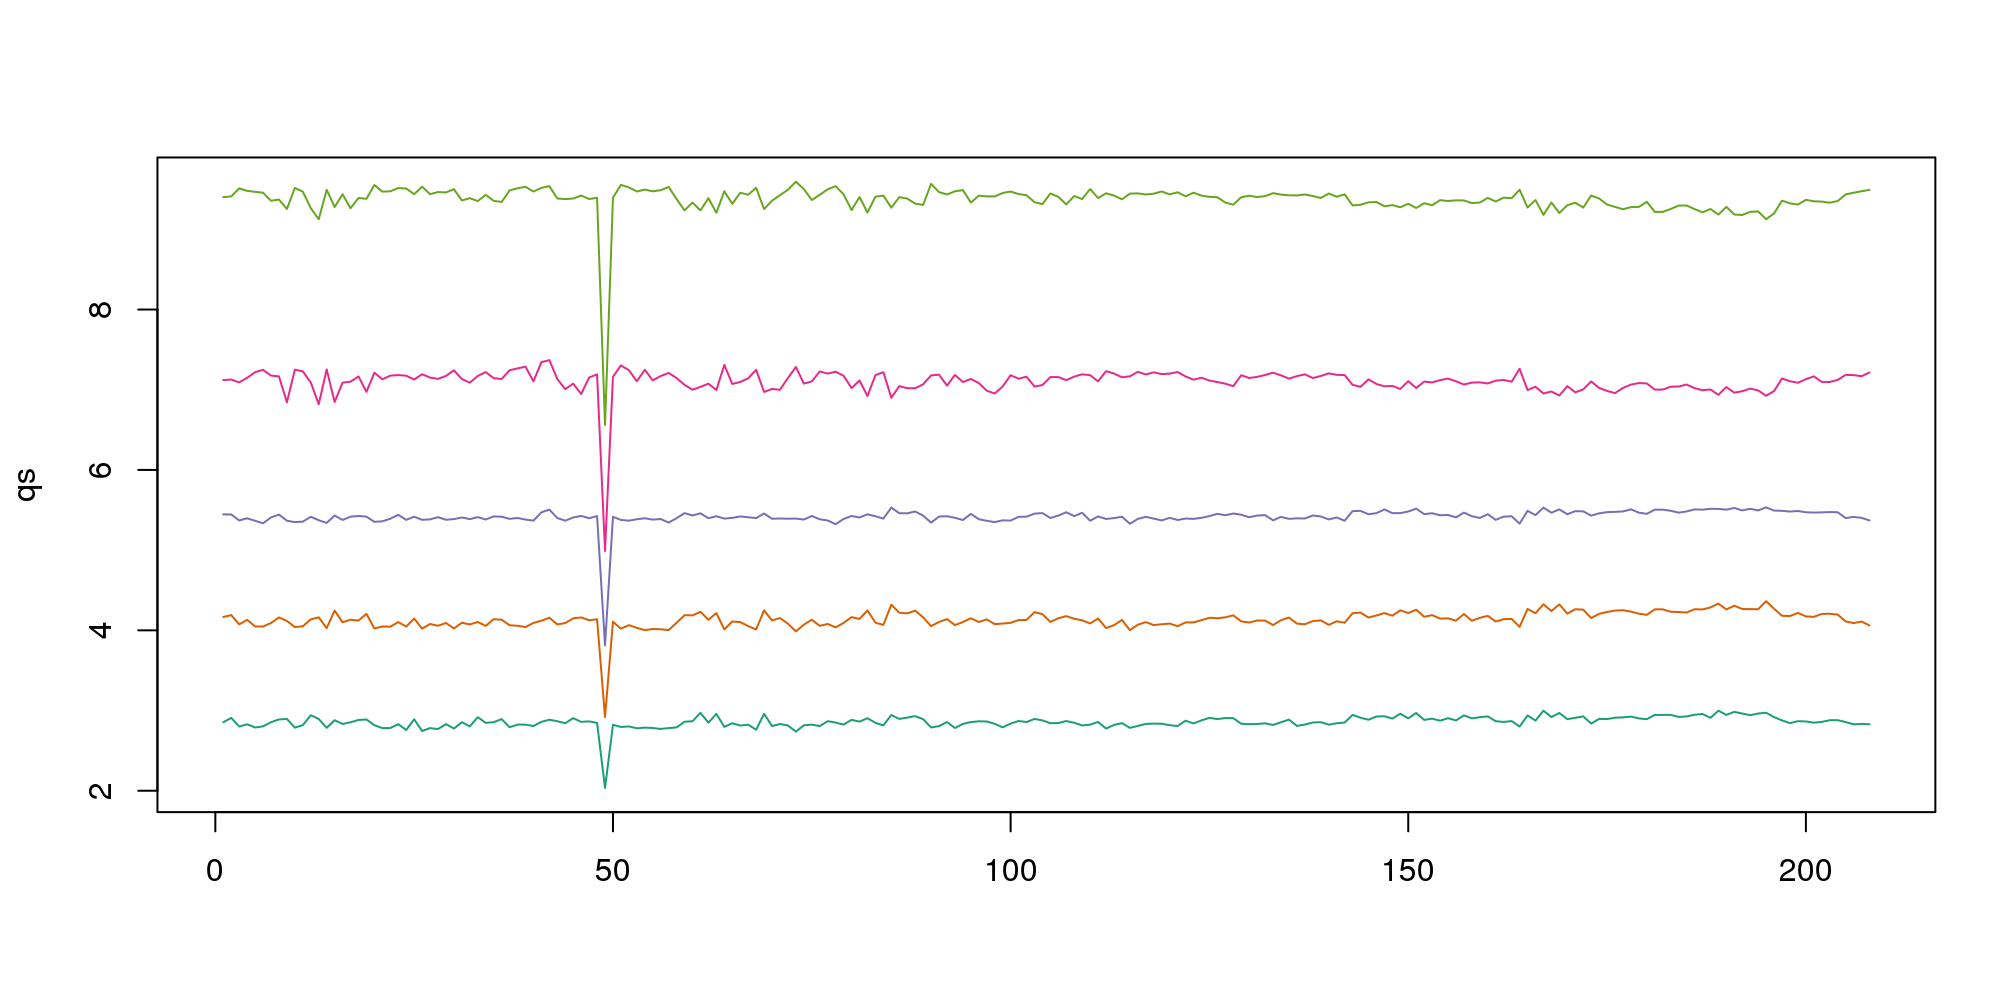 The 0.05, 0.25, 0.5, 0.75, and 0.95 quantiles are plotted for each sample.